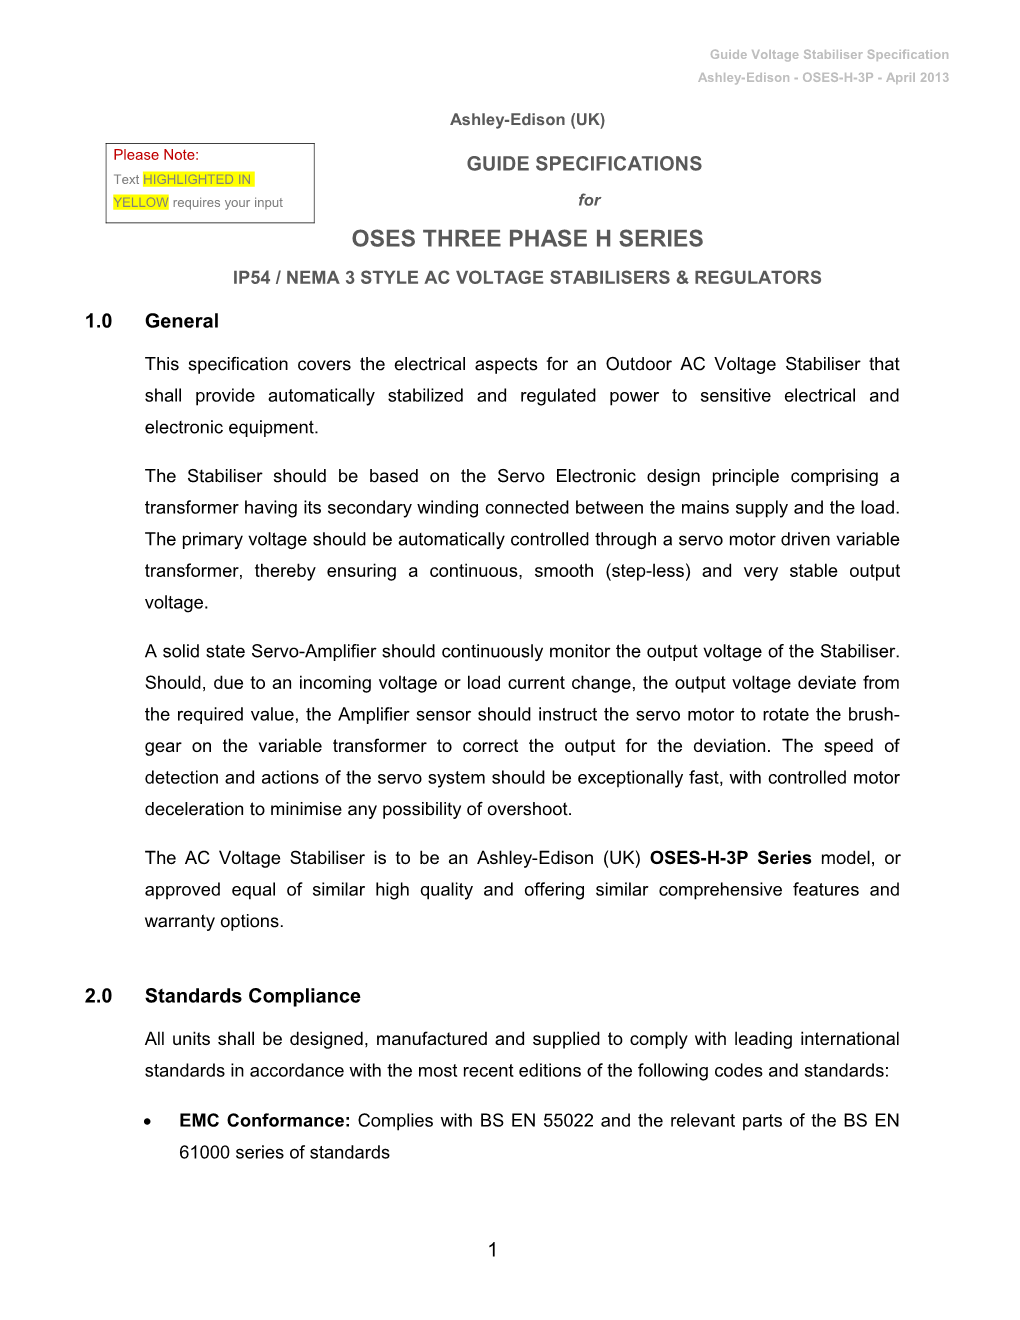 Guide Specification for Ashley-Edison OSES Three Phase AC Voltage Stabilisers